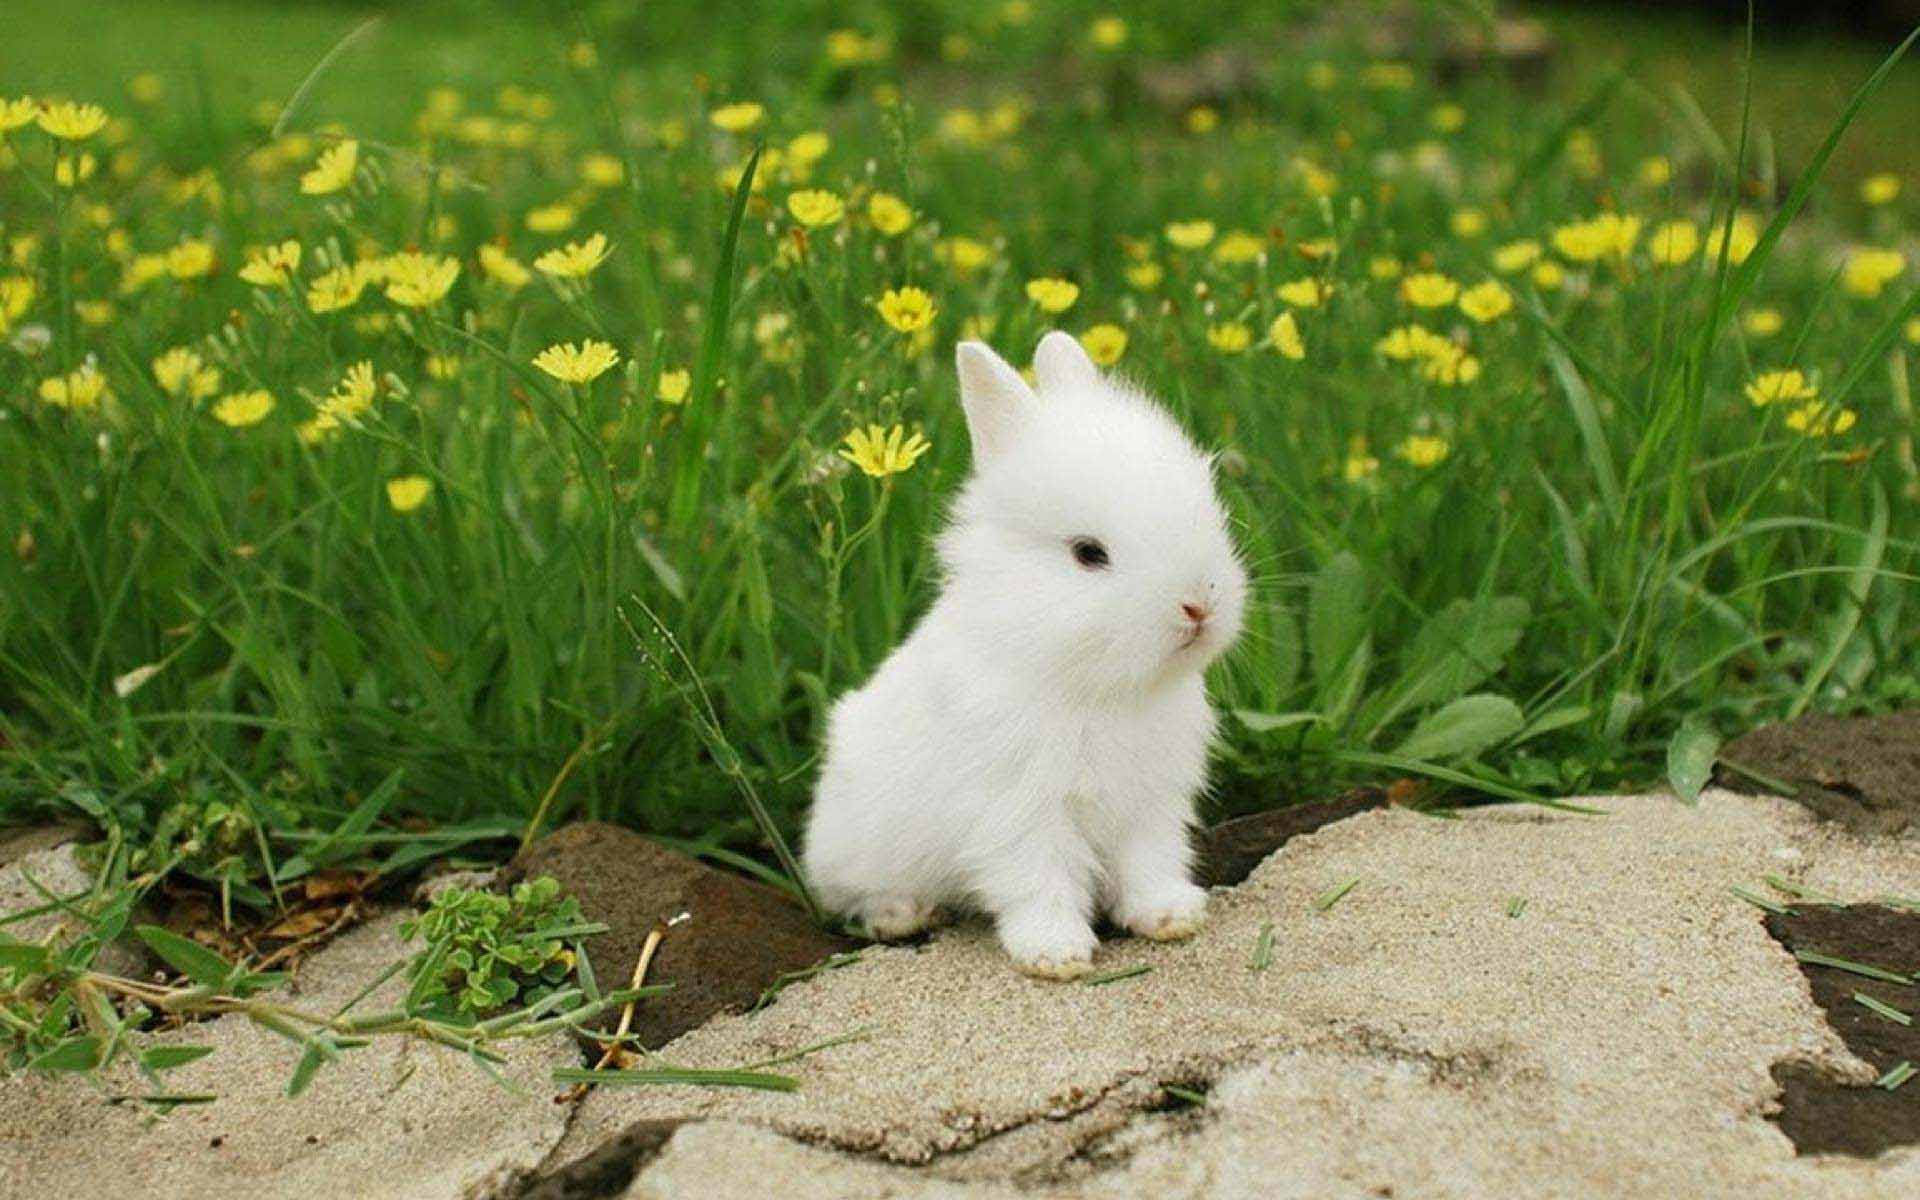 Lovely Best Rabbit Wallpapers Images Photos And Pictures For Free